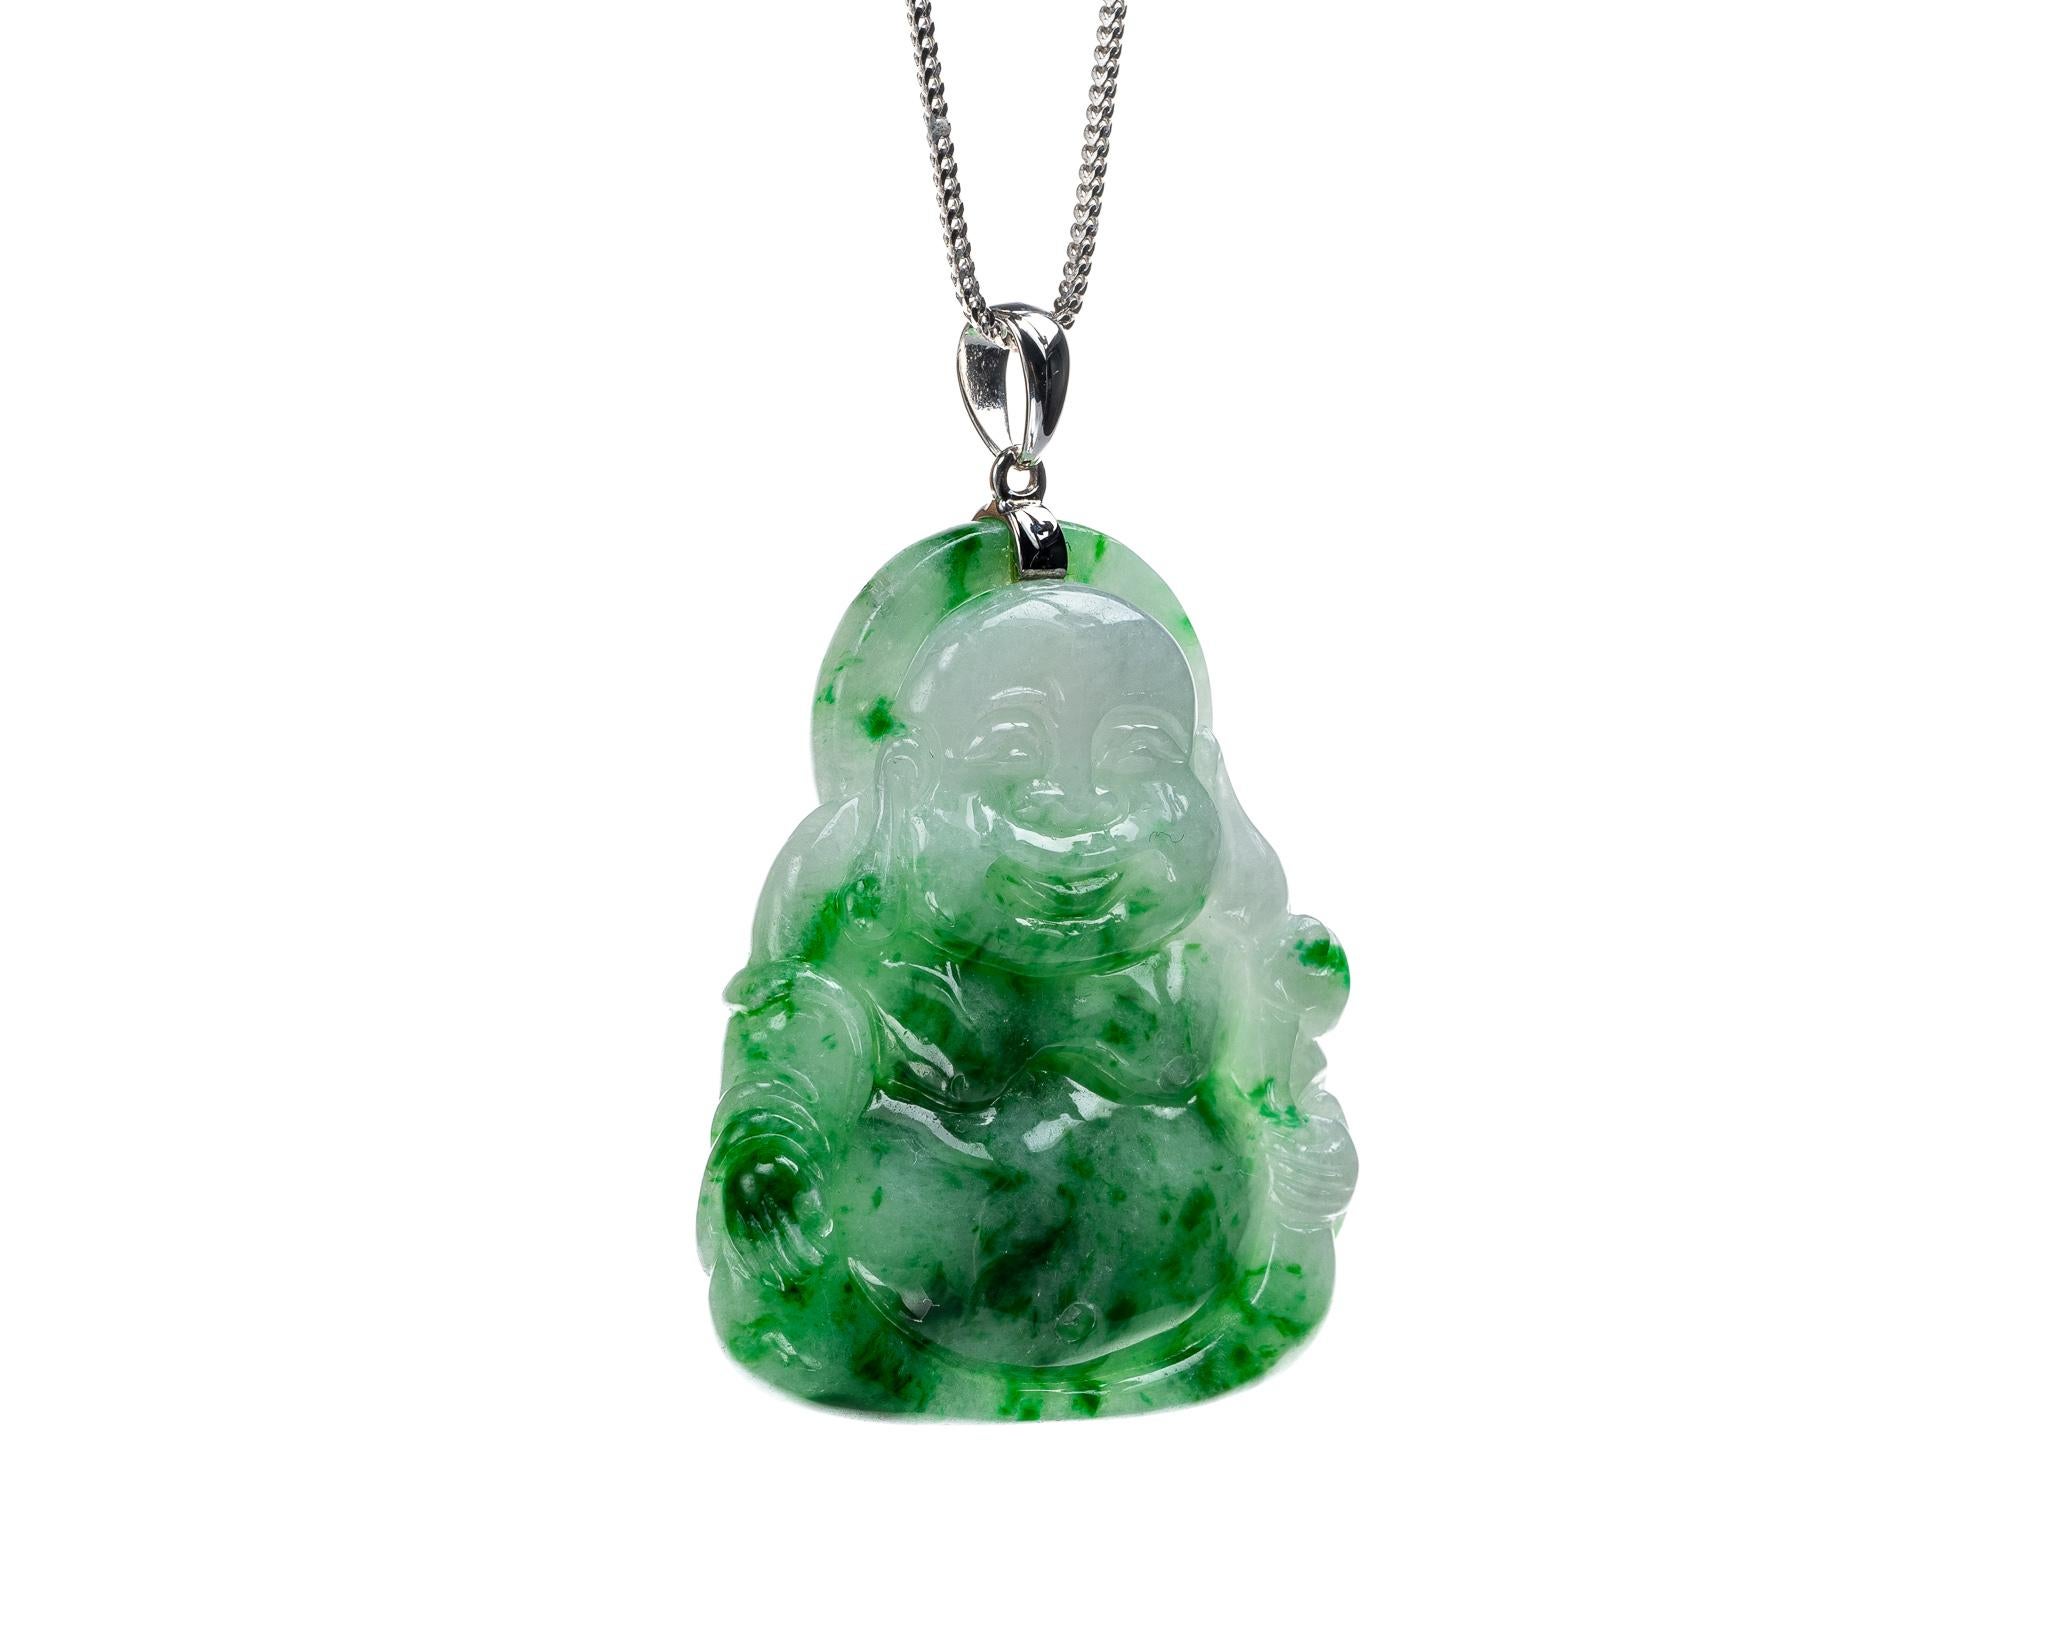 This is an all natural, untreated jadeite jade carved buddha pendant set on an 18K white gold bail.  
   
It 1.26 inches (32.2mm) x 1.51 inches (38.5mm) with thickness of 0.26 inches (6.7mm) weighing 16.2 grams. 

Included is a Hong Kong Gems